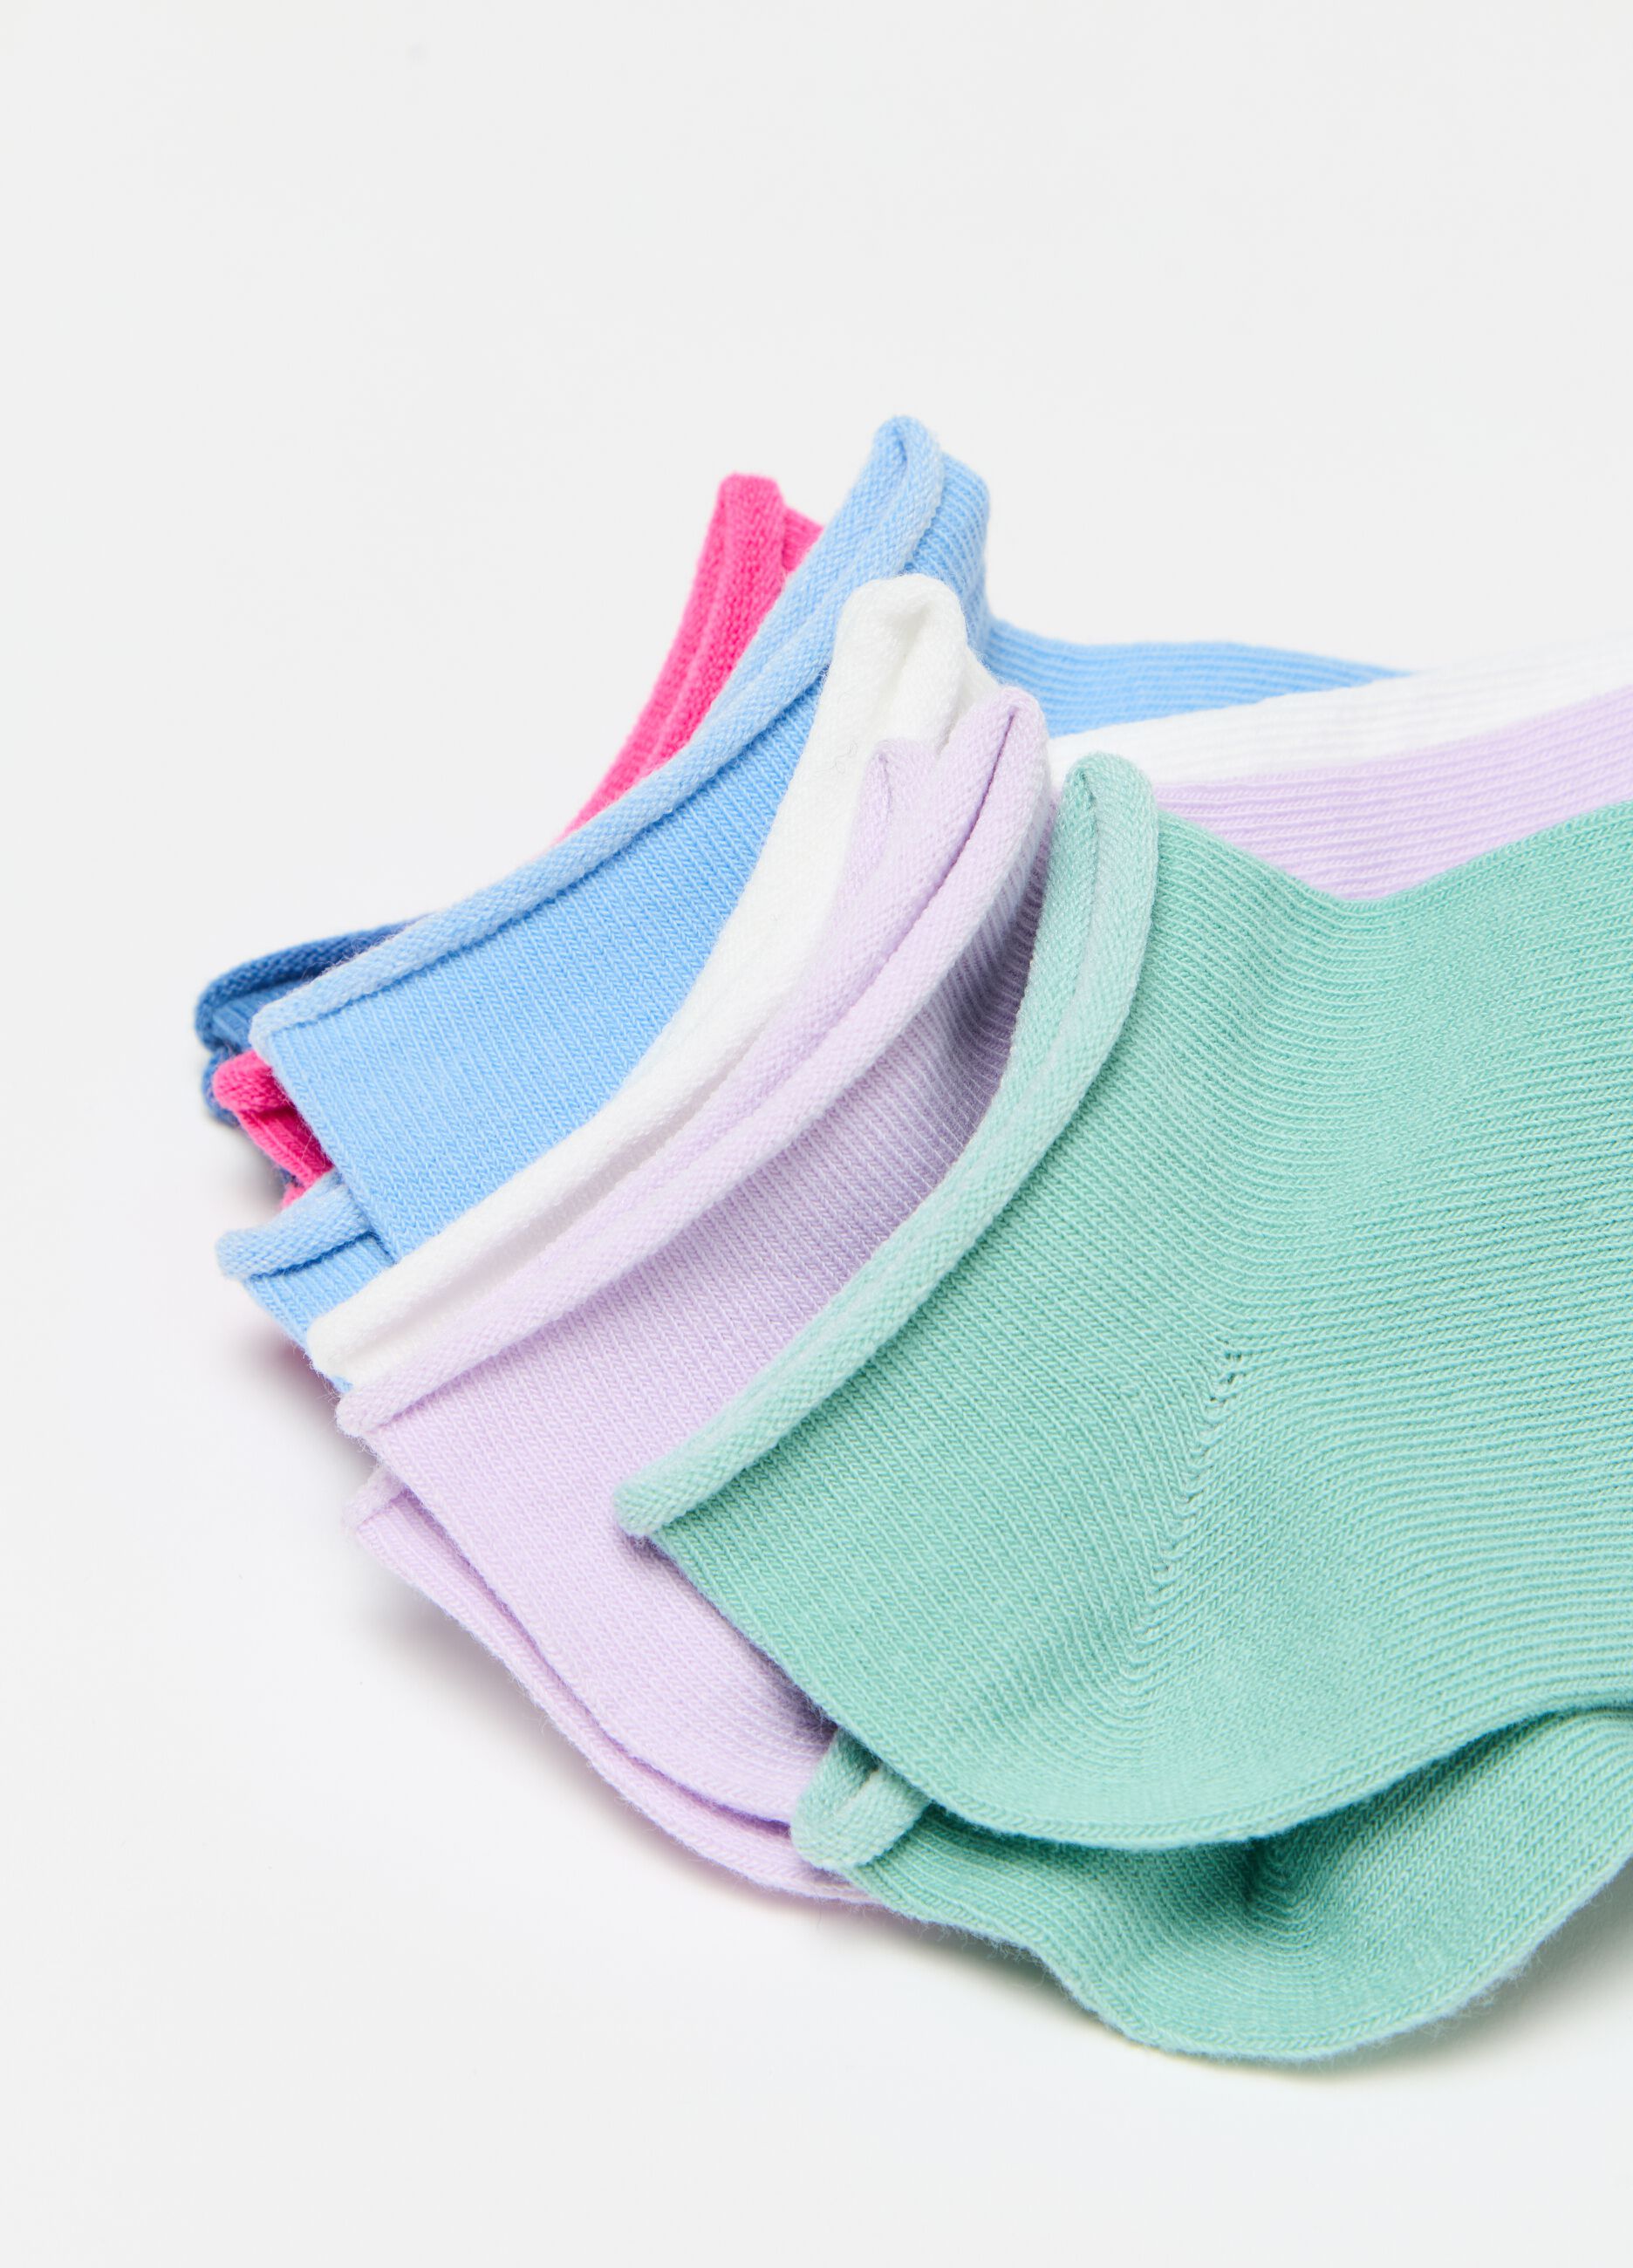 Seven-pair pack shoe liners in organic cotton